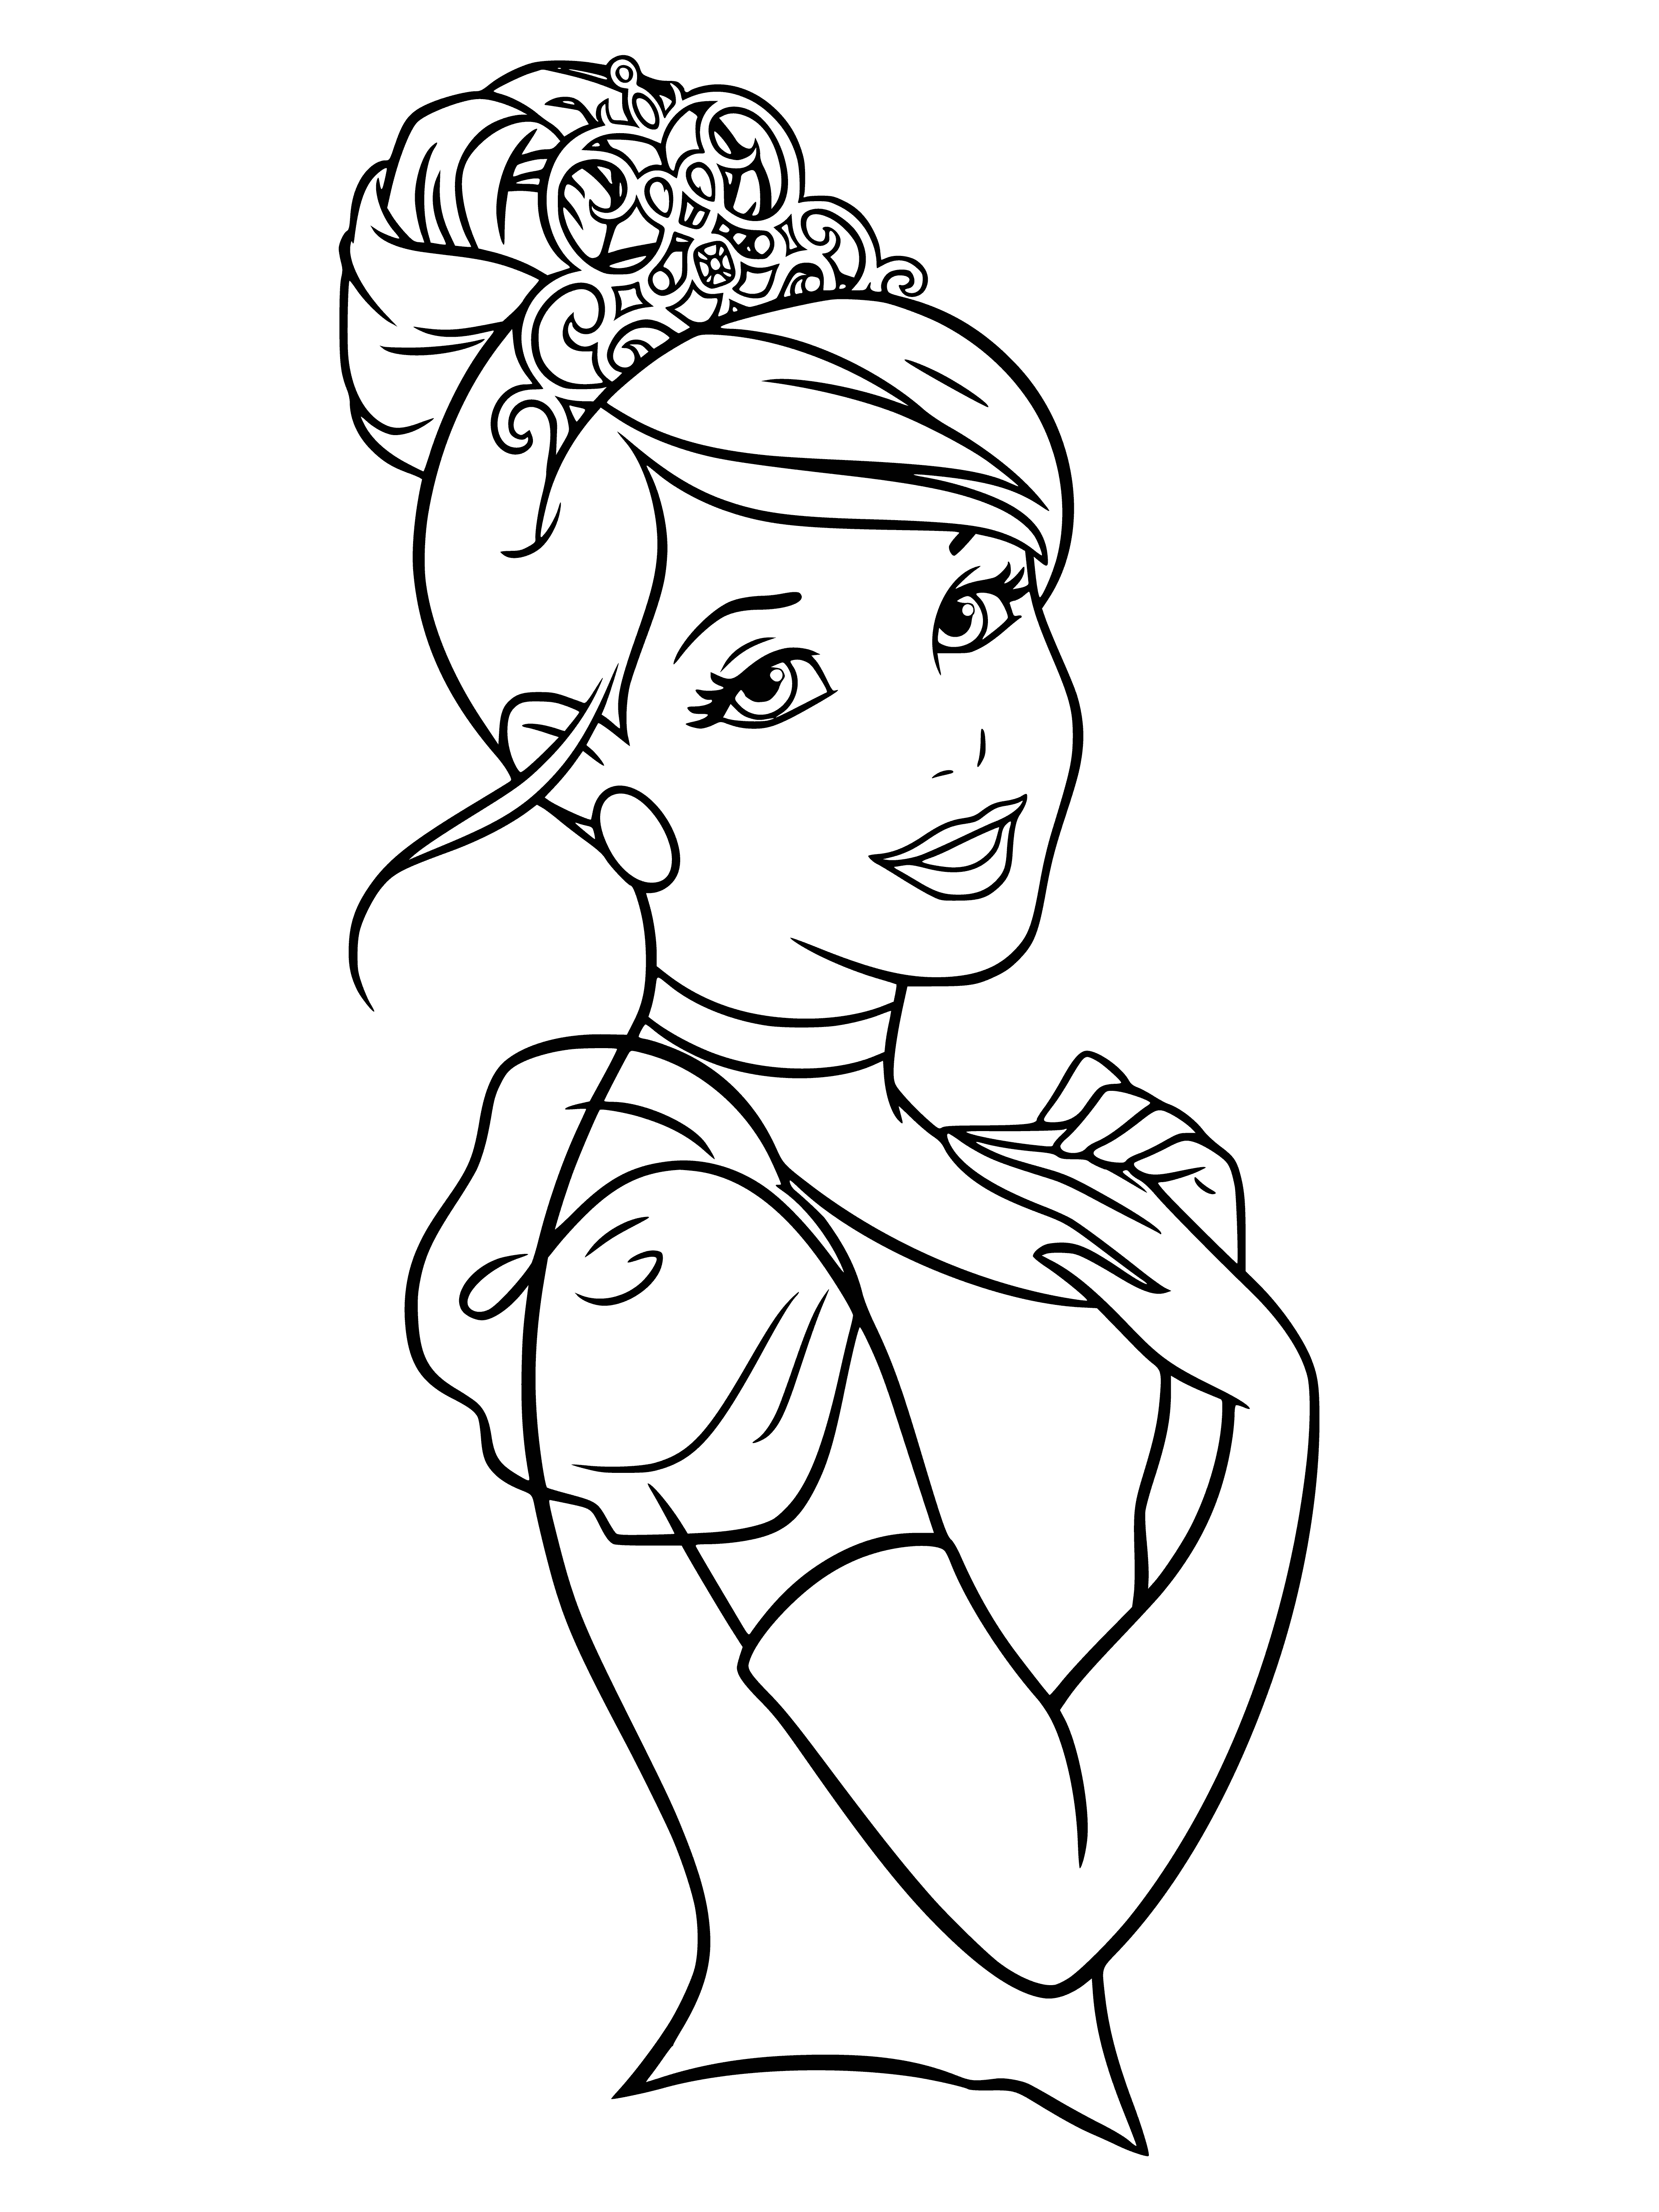 coloring page: Cinderella stands in front of a castle, wearing a blue dress with long, blonde hair. #fairytaleclassic